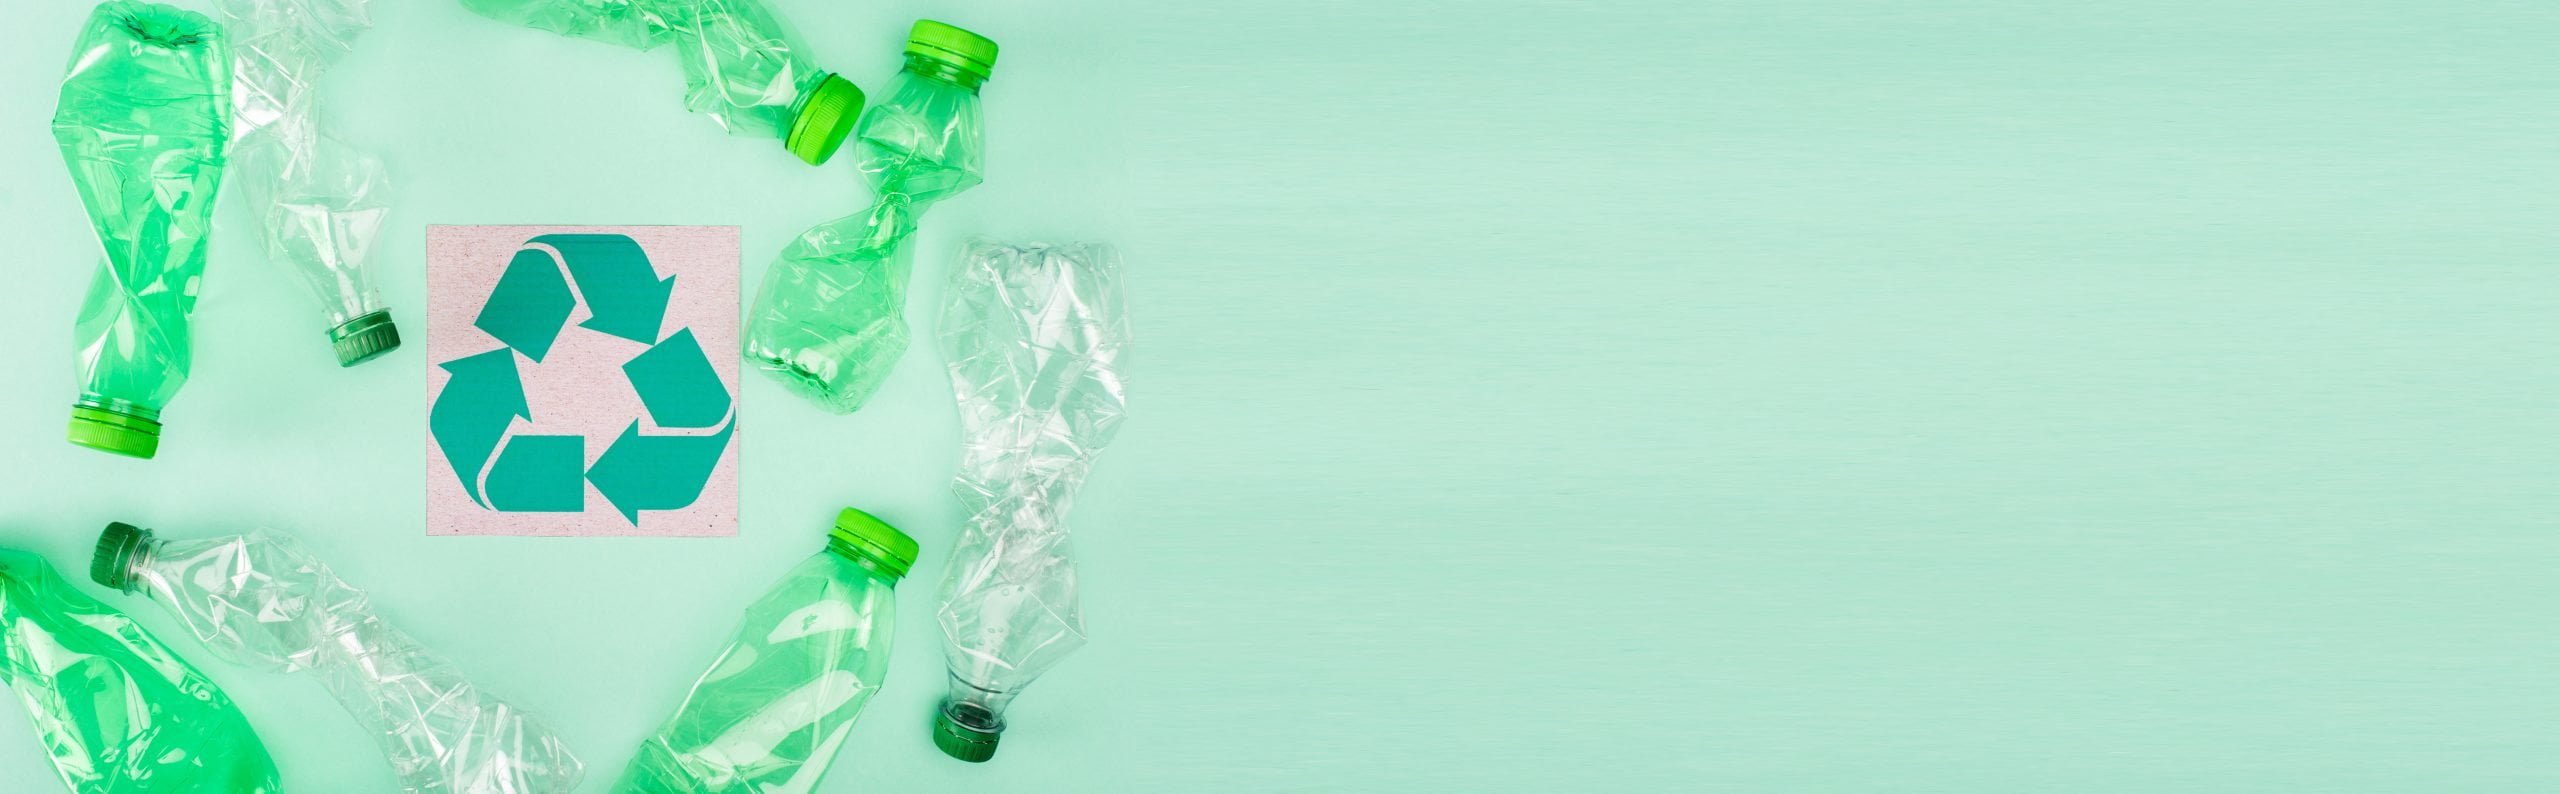 Panoramic Concept Of Crumpled Plastic Bottles Near Card With Recycle Symbol On Green Background, Ecology Concept